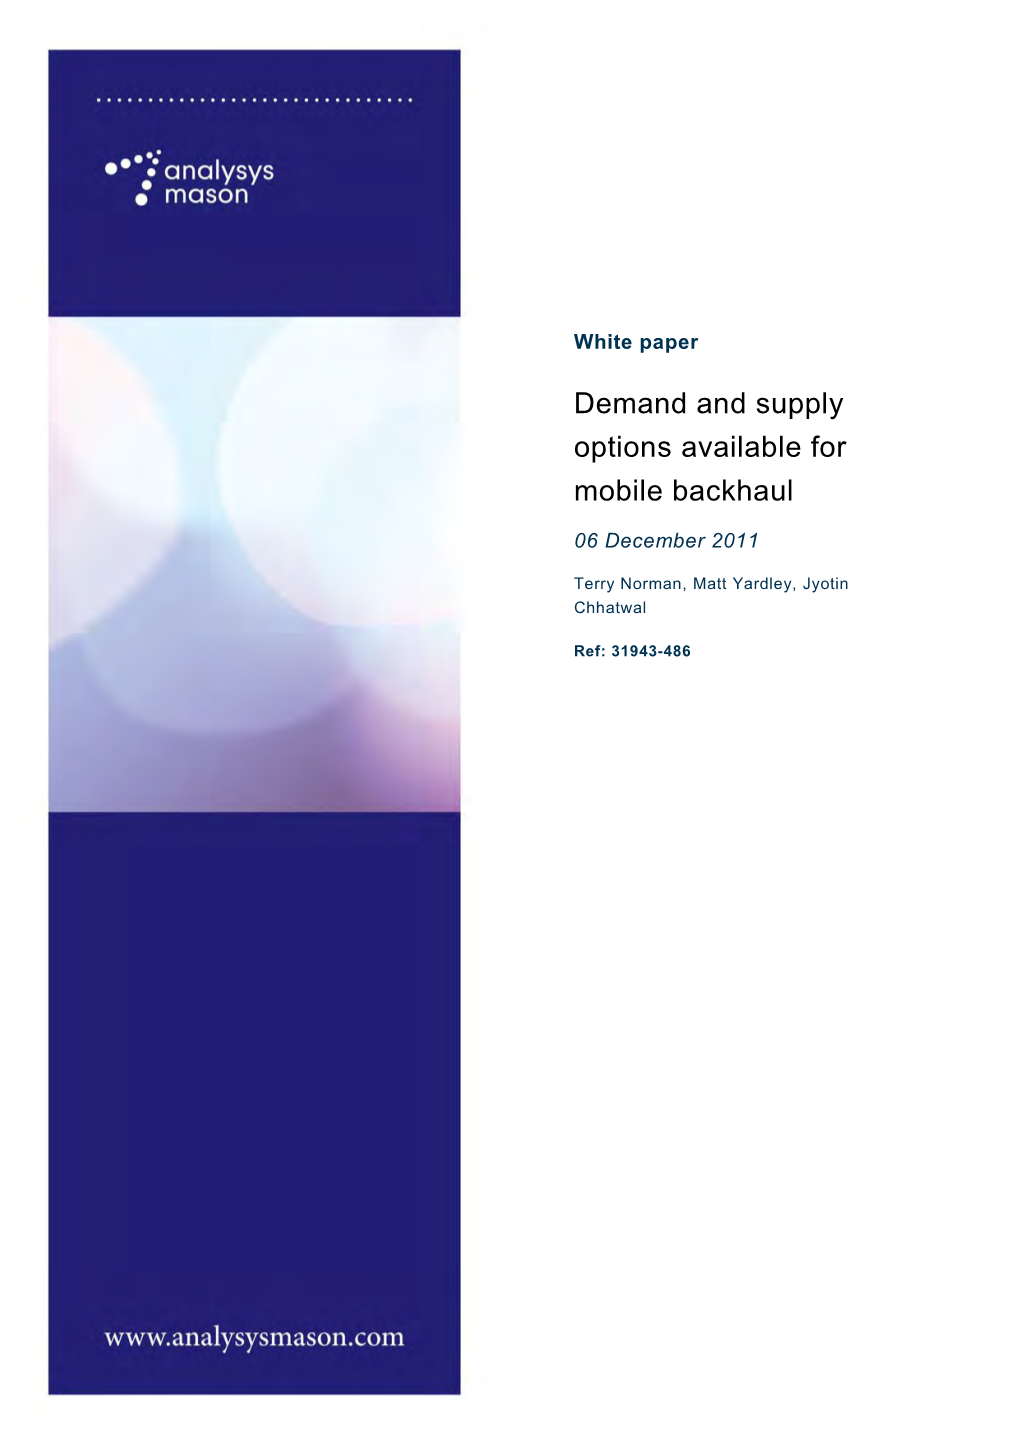 Demand and Supply Options Available for Mobile Backhaul